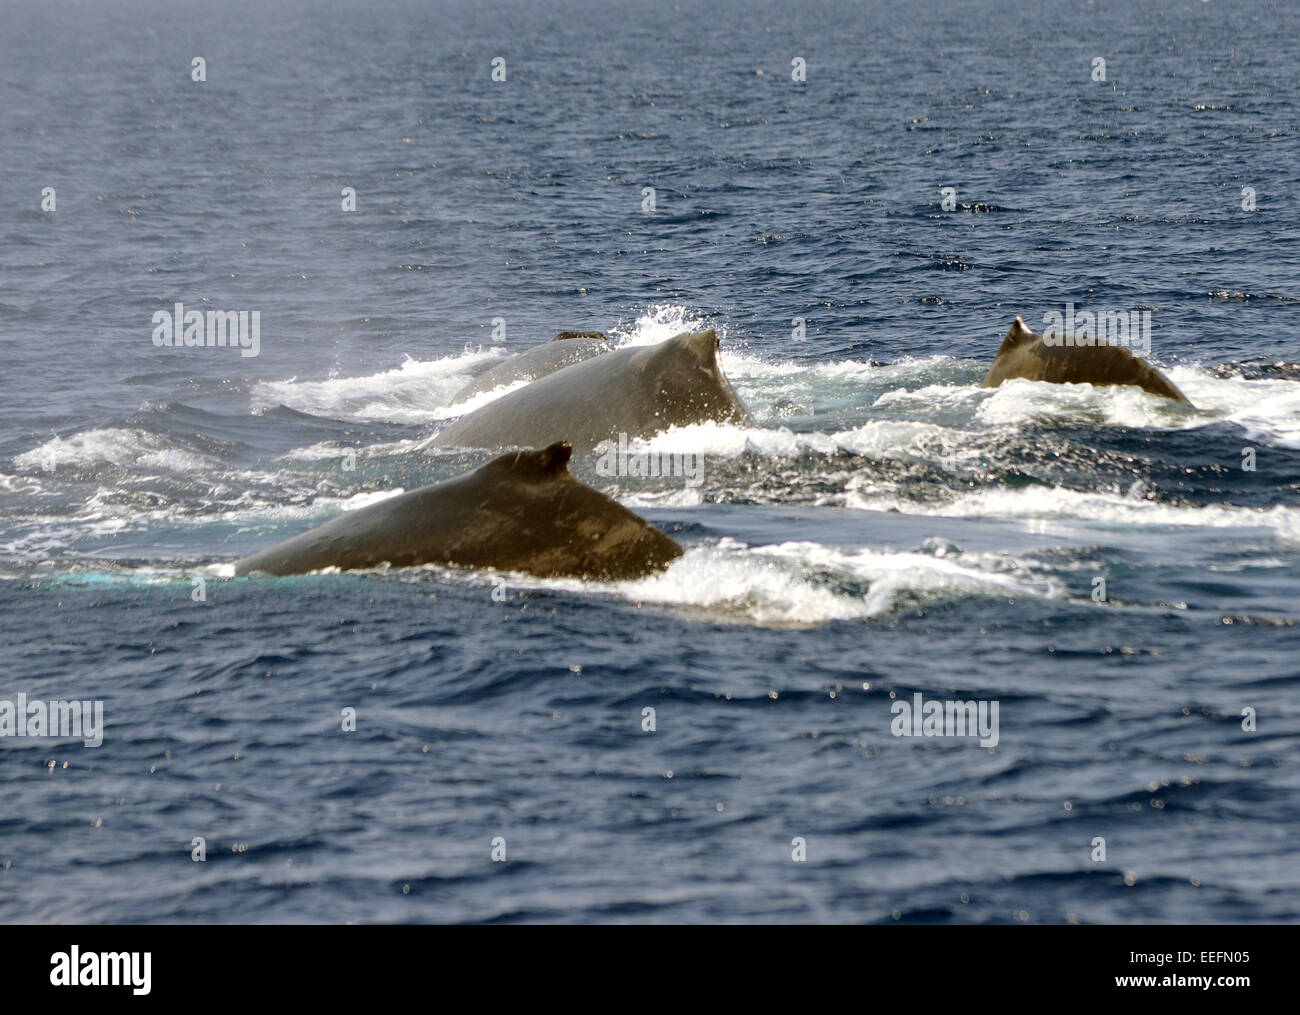 Group of sperm whales in the waters of the Pacific Stock Photo